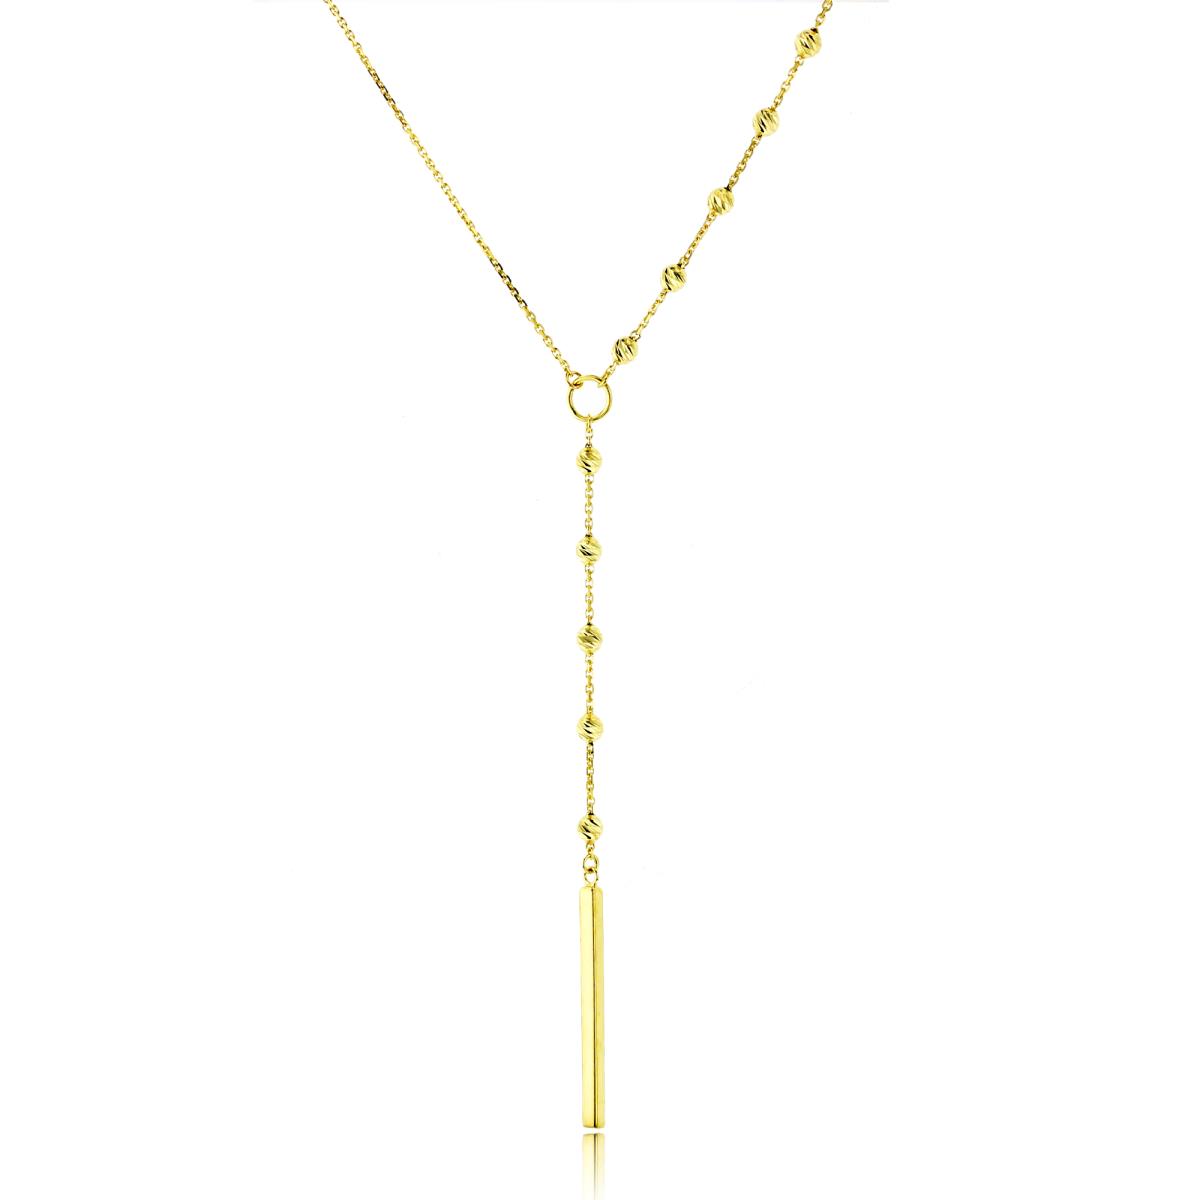 10K Yellow Gold 3mm Beaded Polished Bar 18" Necklace